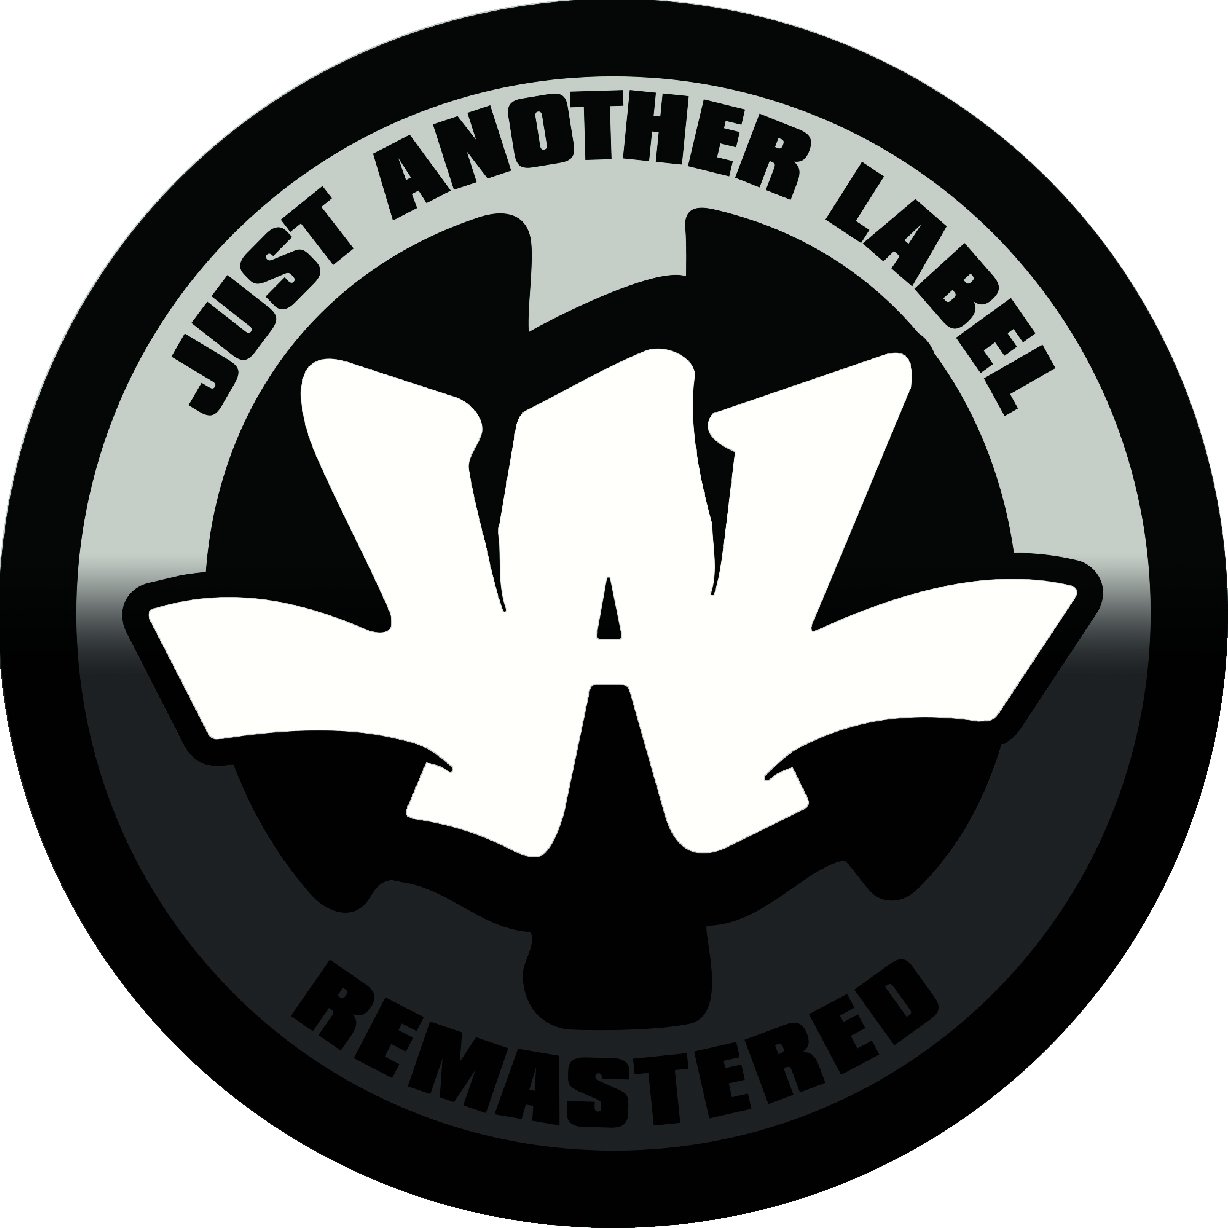 Just Another Label logo